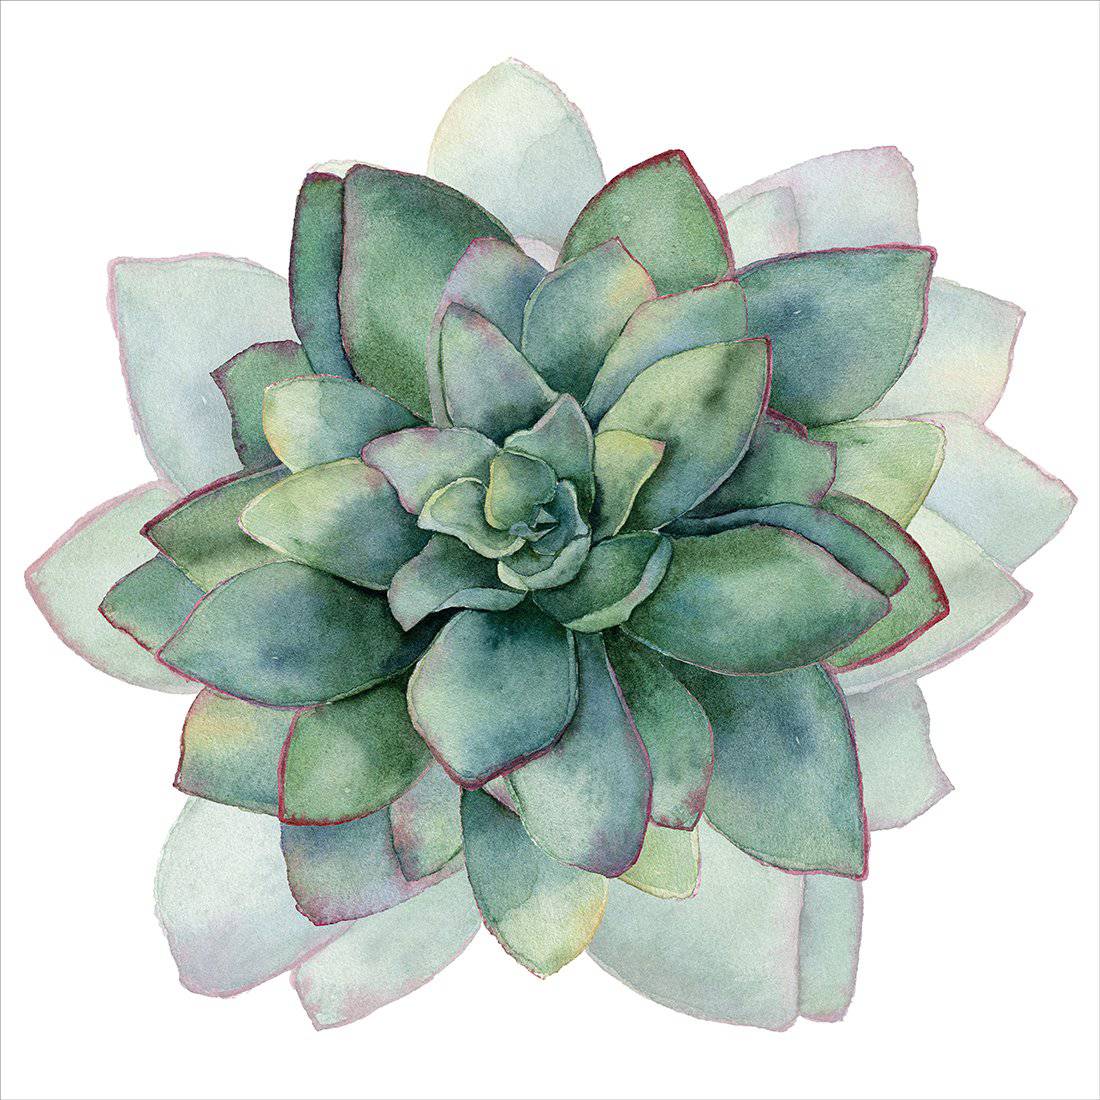 Succulent Spiral, Square-Acrylic-Wall Art Design-With Border-Acrylic - No Frame-37x37cm-Wall Art Designs